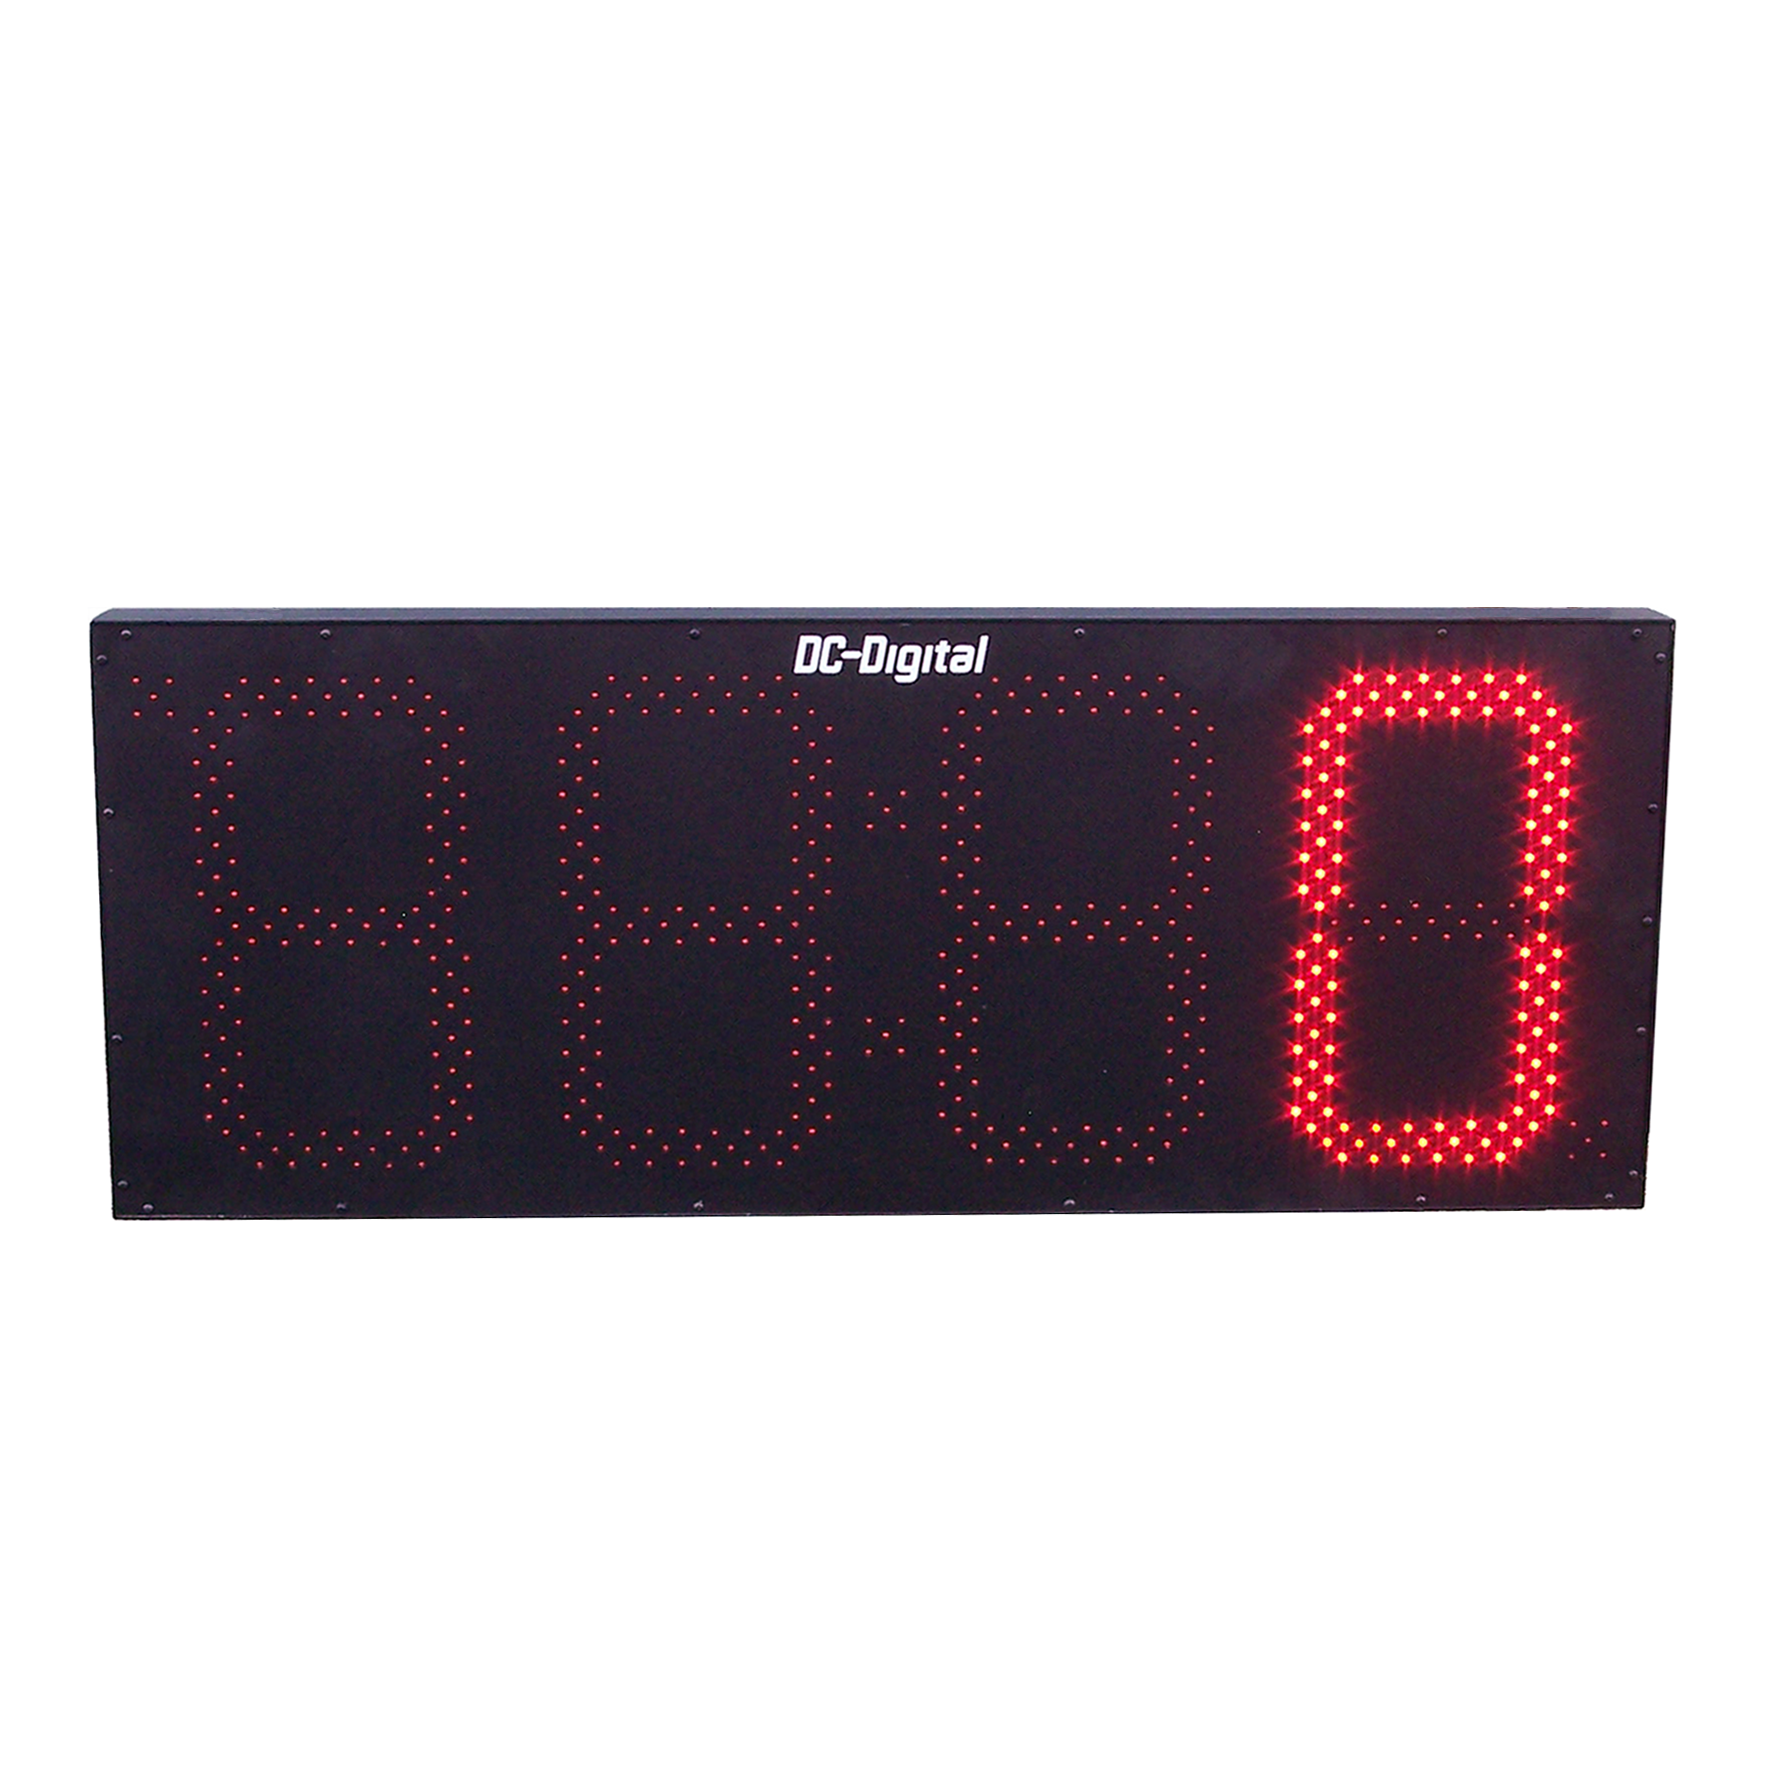 (DC-150T-UP-DAYS-IN) 15.0 Inch LED Digital, Environmentally Sealed Push-Button Controlled, Count Up by Days Timer (INDOOR)